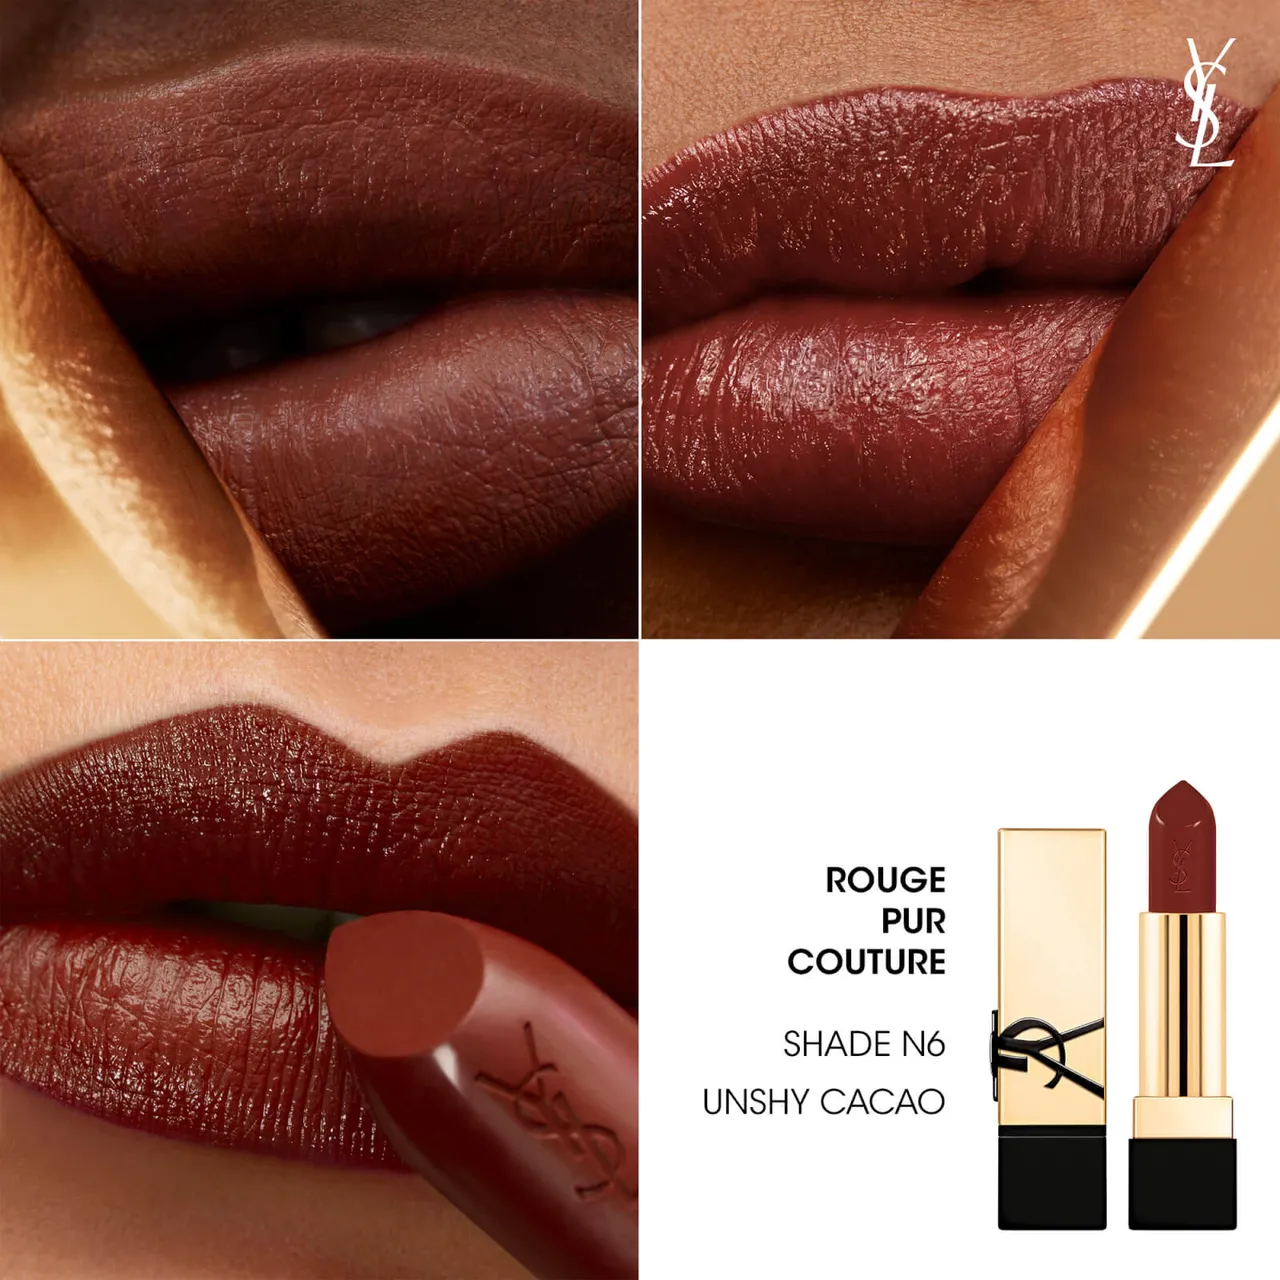 Yves Saint Laurent Rouge Pur Couture Renovation Lipstick 3g (Various Shades) - N6